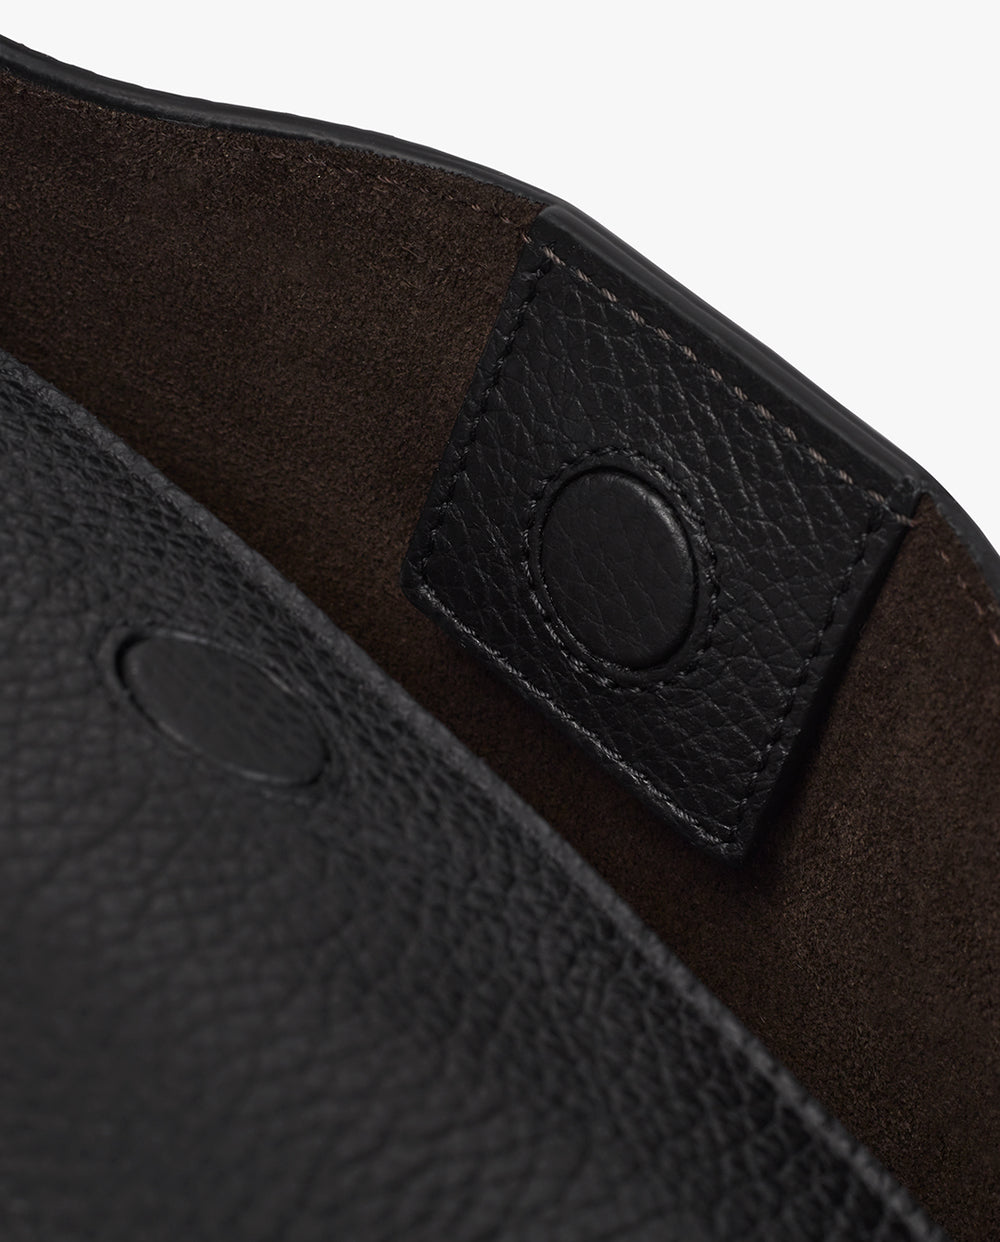 Close-up of a leather bag with a snap button detail on a strap.